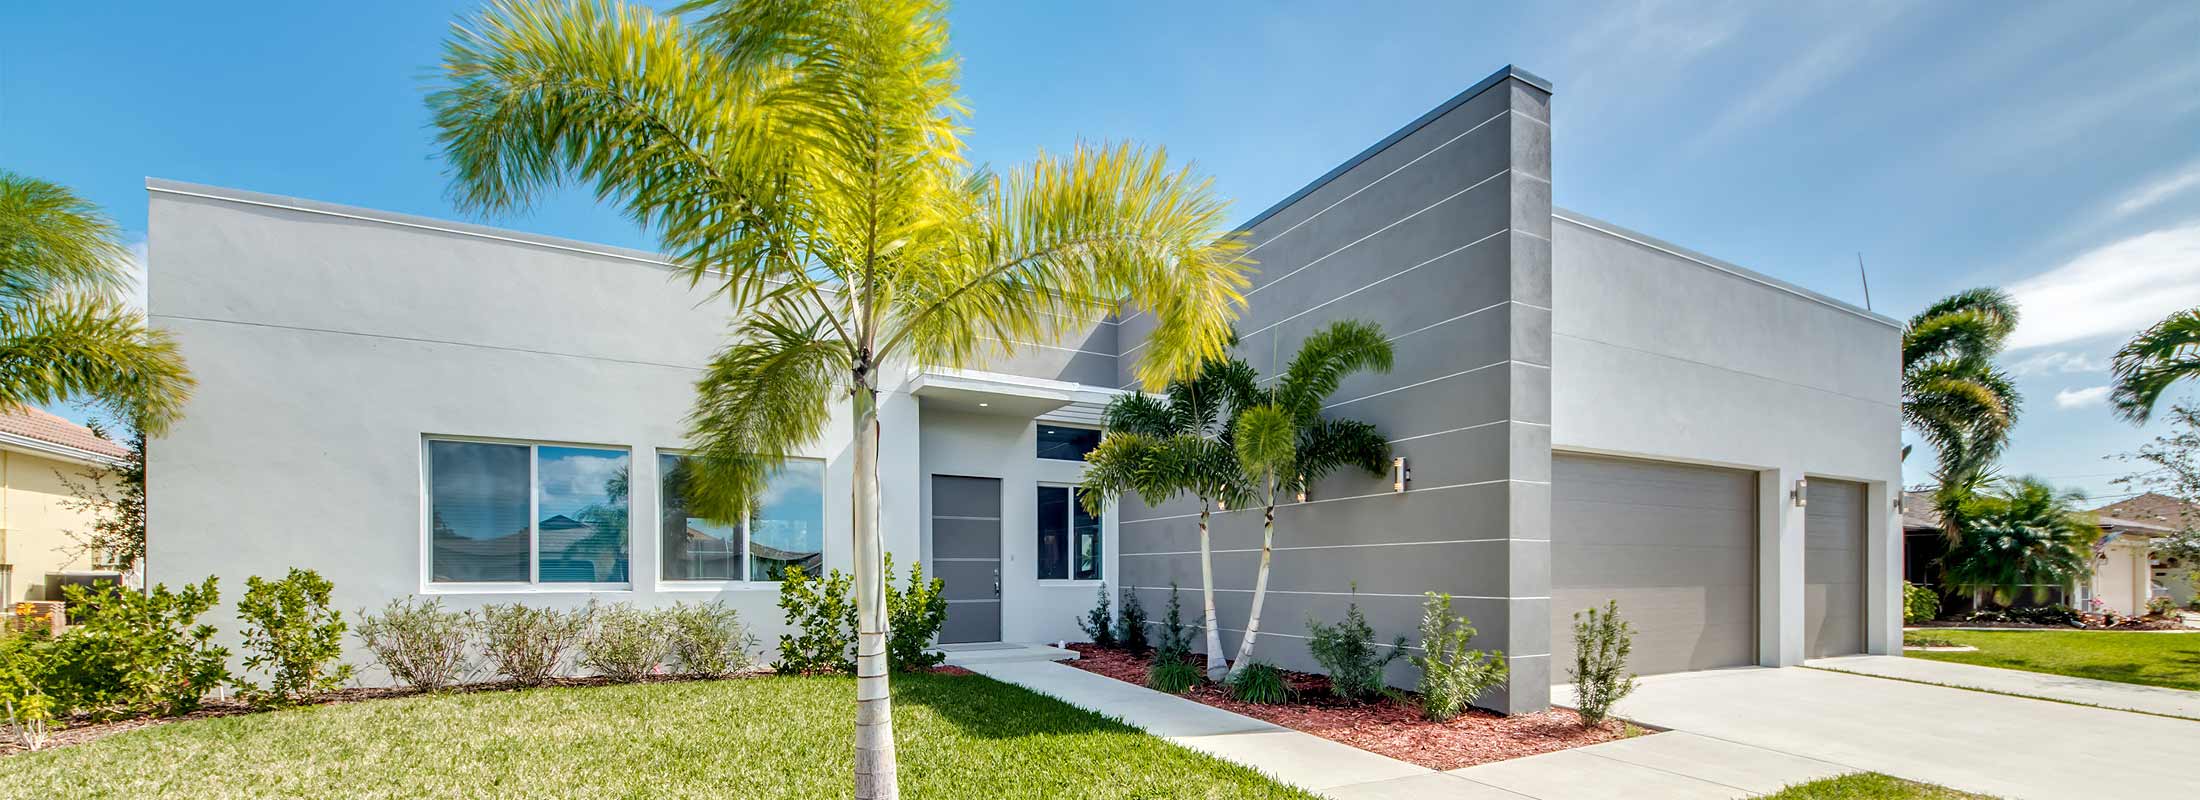 NMB Florida Immobilien